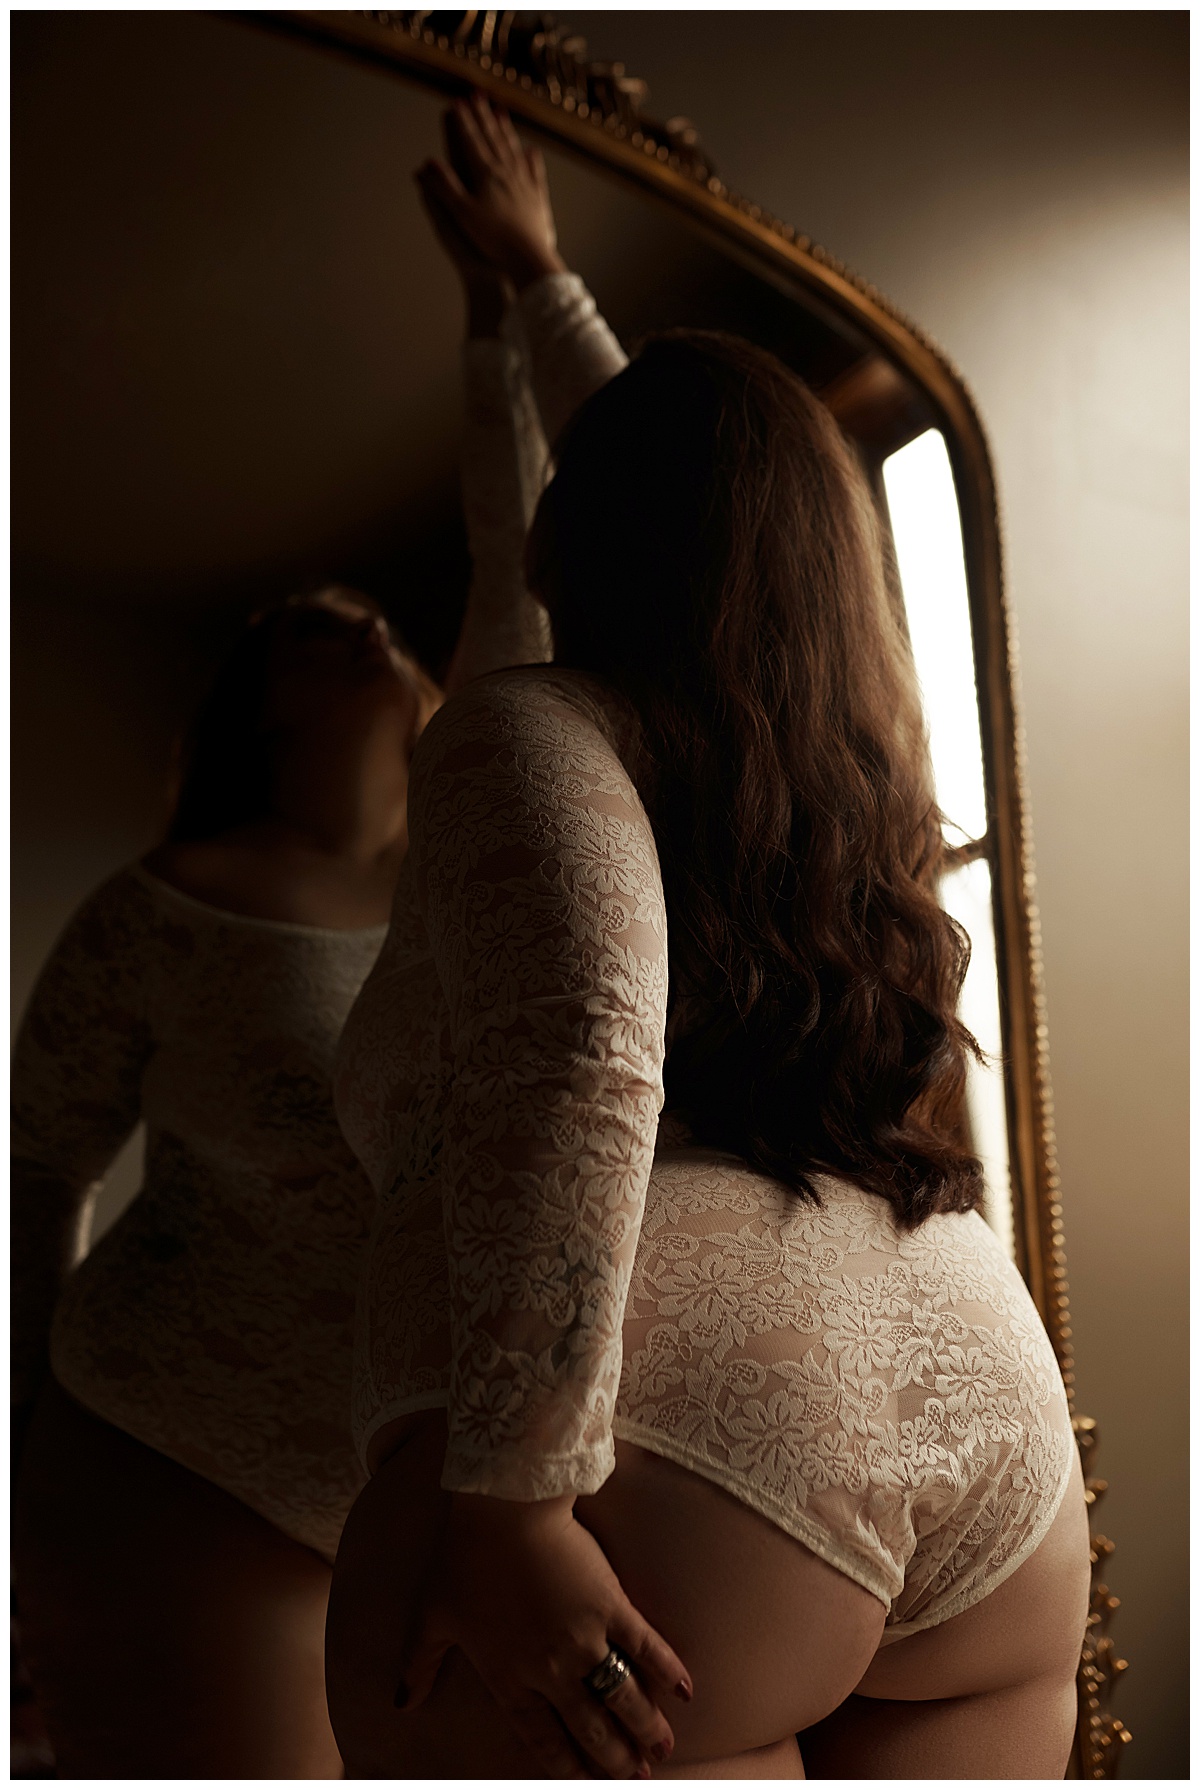 Person stands in front of the mirror wearing lingerie for Sioux Falls Boudoir Photographer